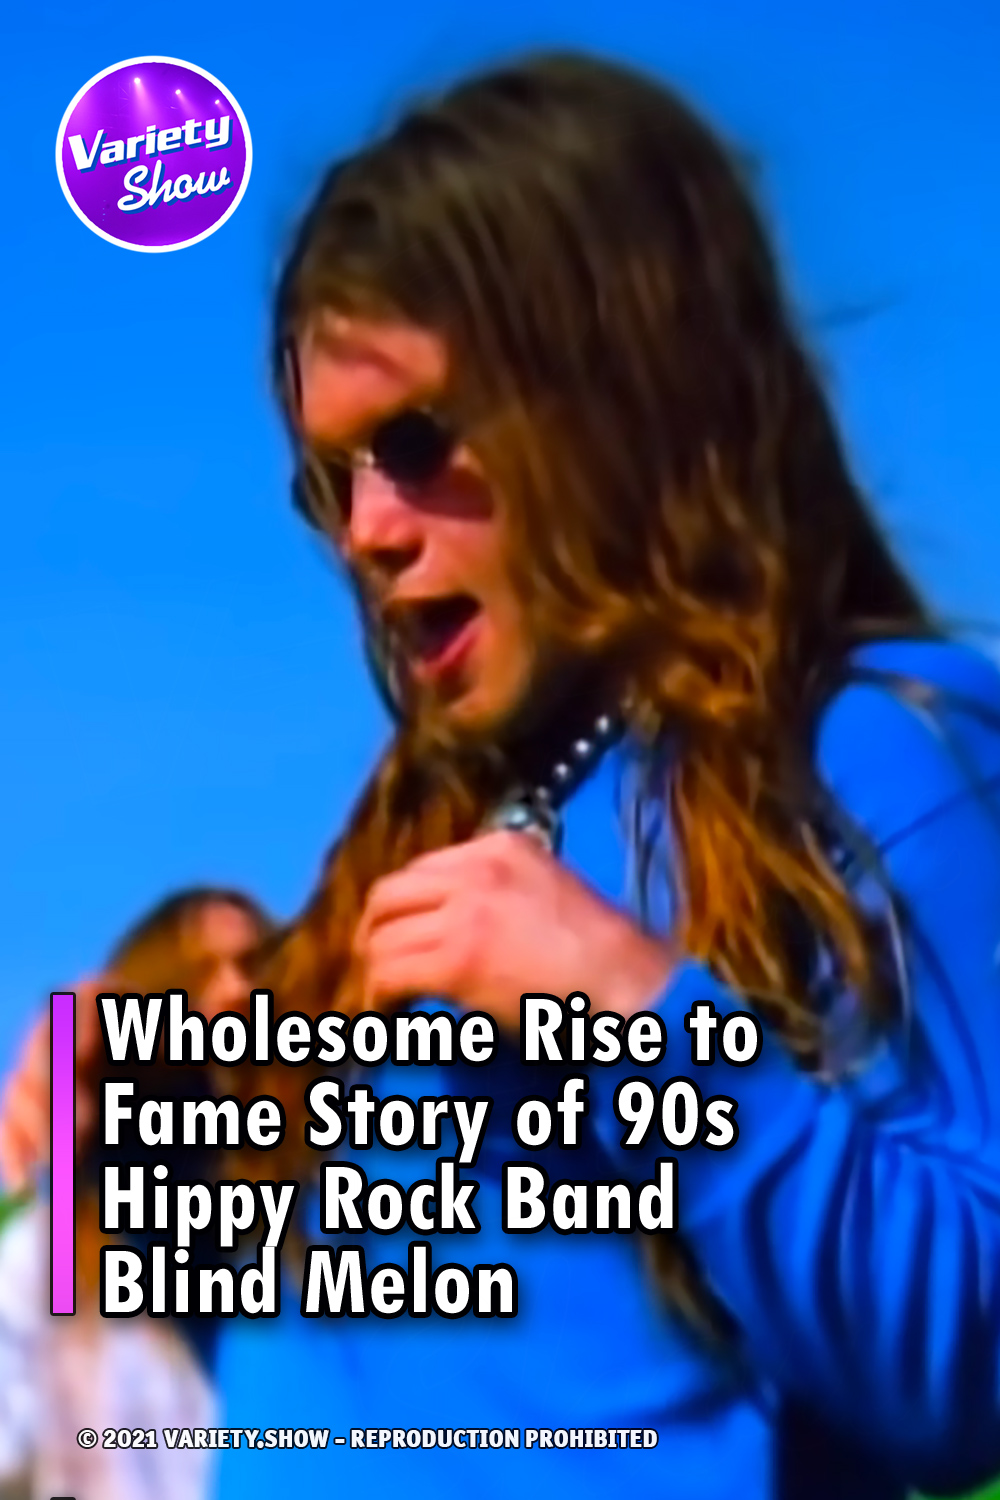 Wholesome Rise to Fame Story of 90s Hippy Rock Band Blind Melon